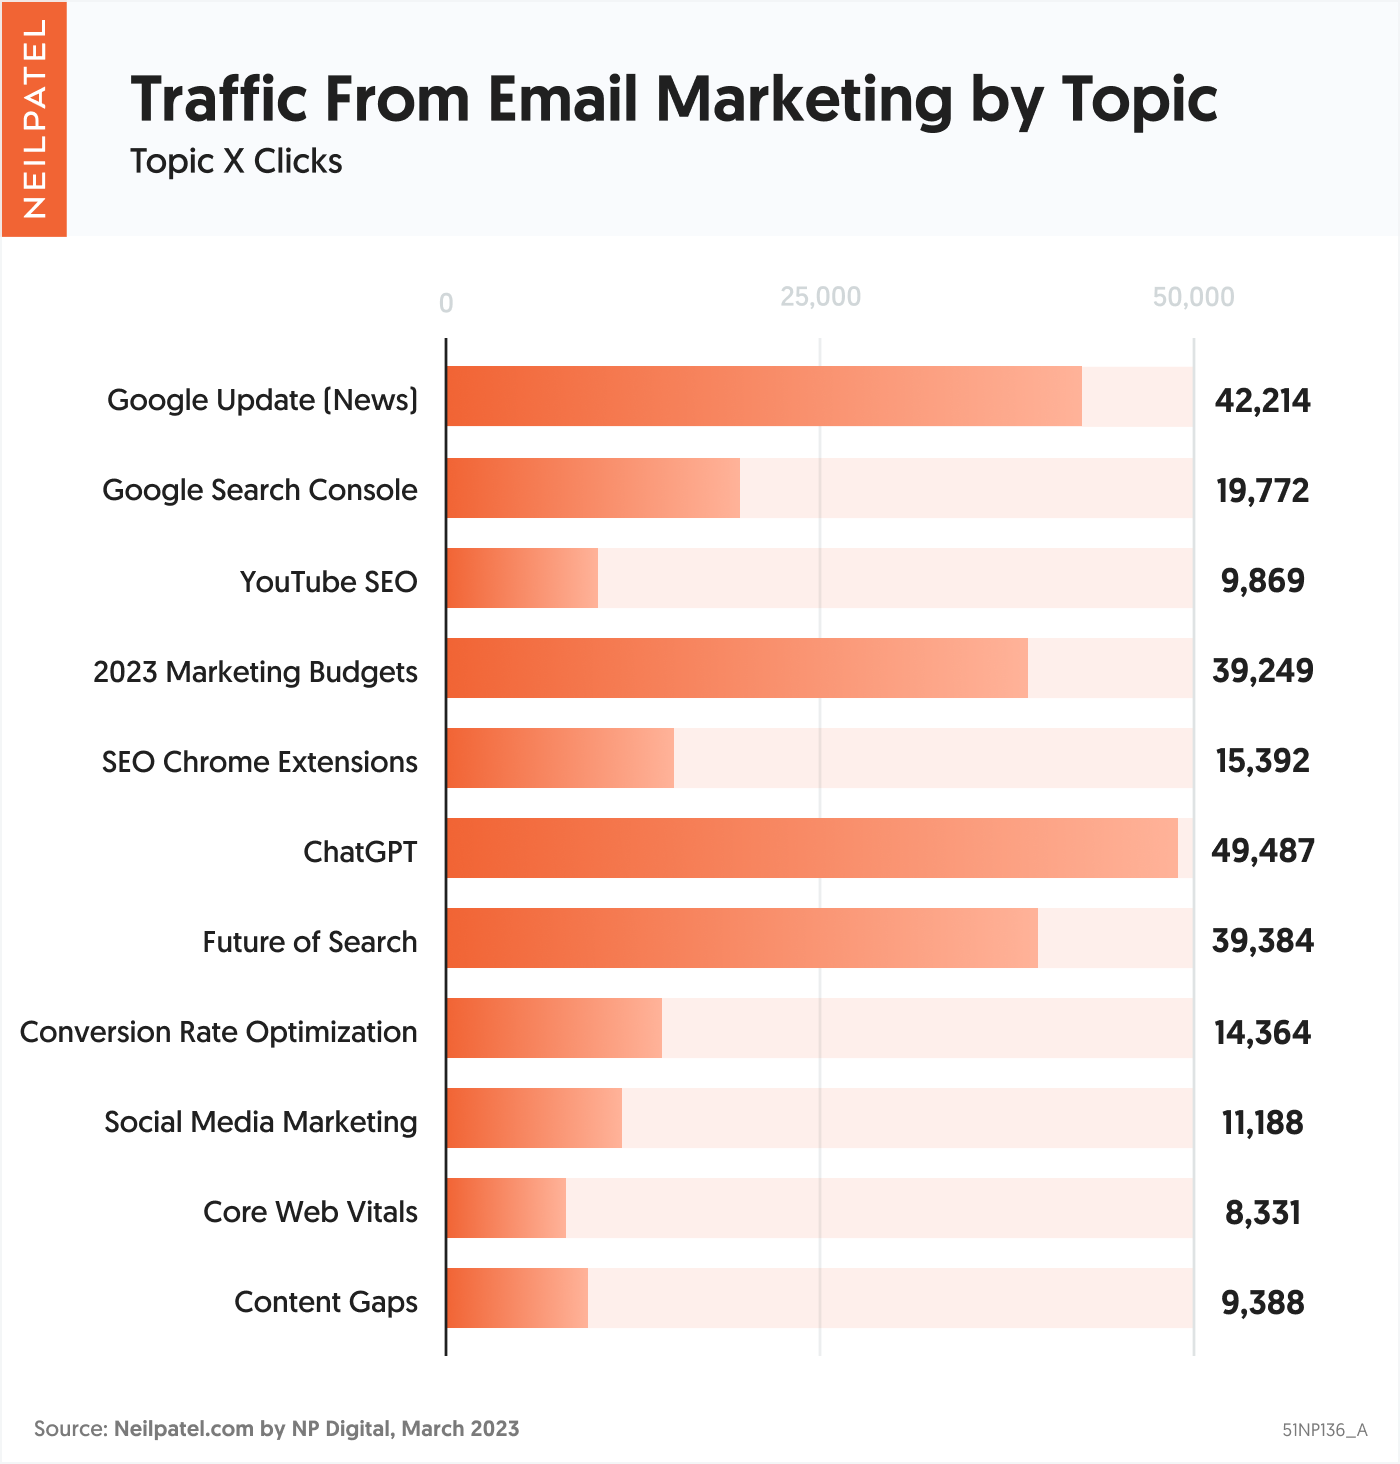 Traffic From Email Marketing by Topic